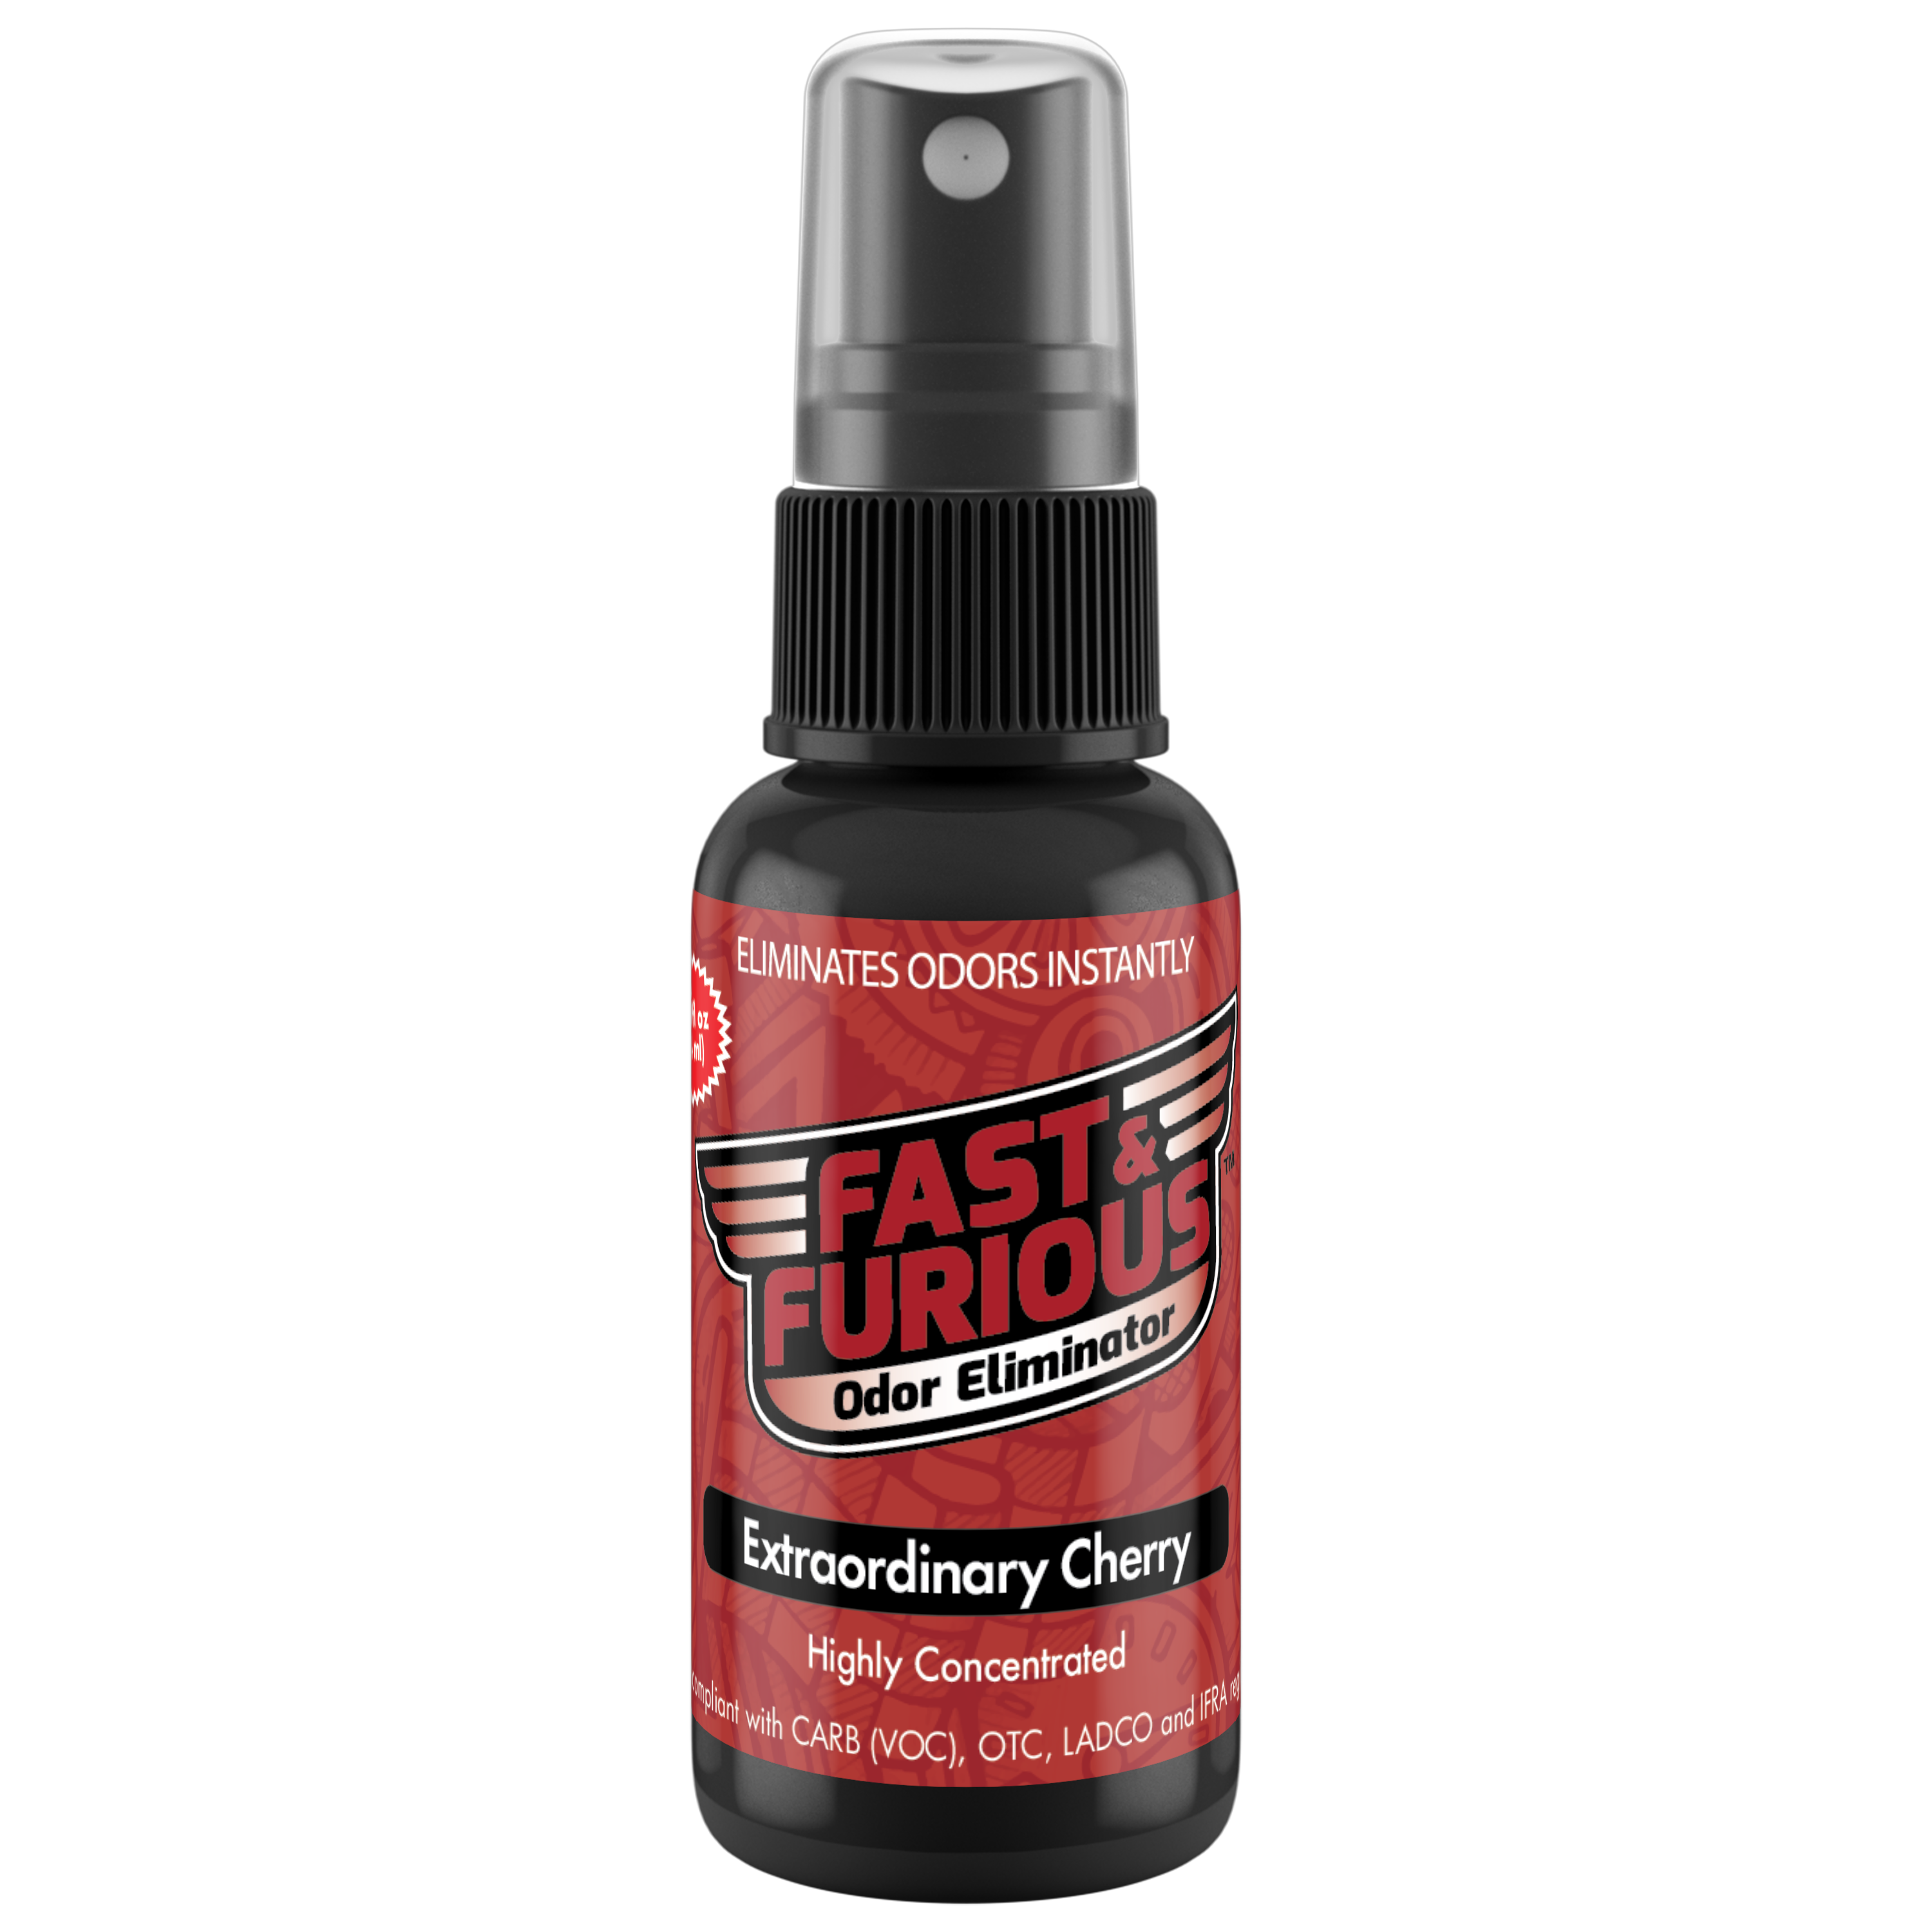 Fast and Furious Odor Eliminator - Extraordinary Cherry Scent